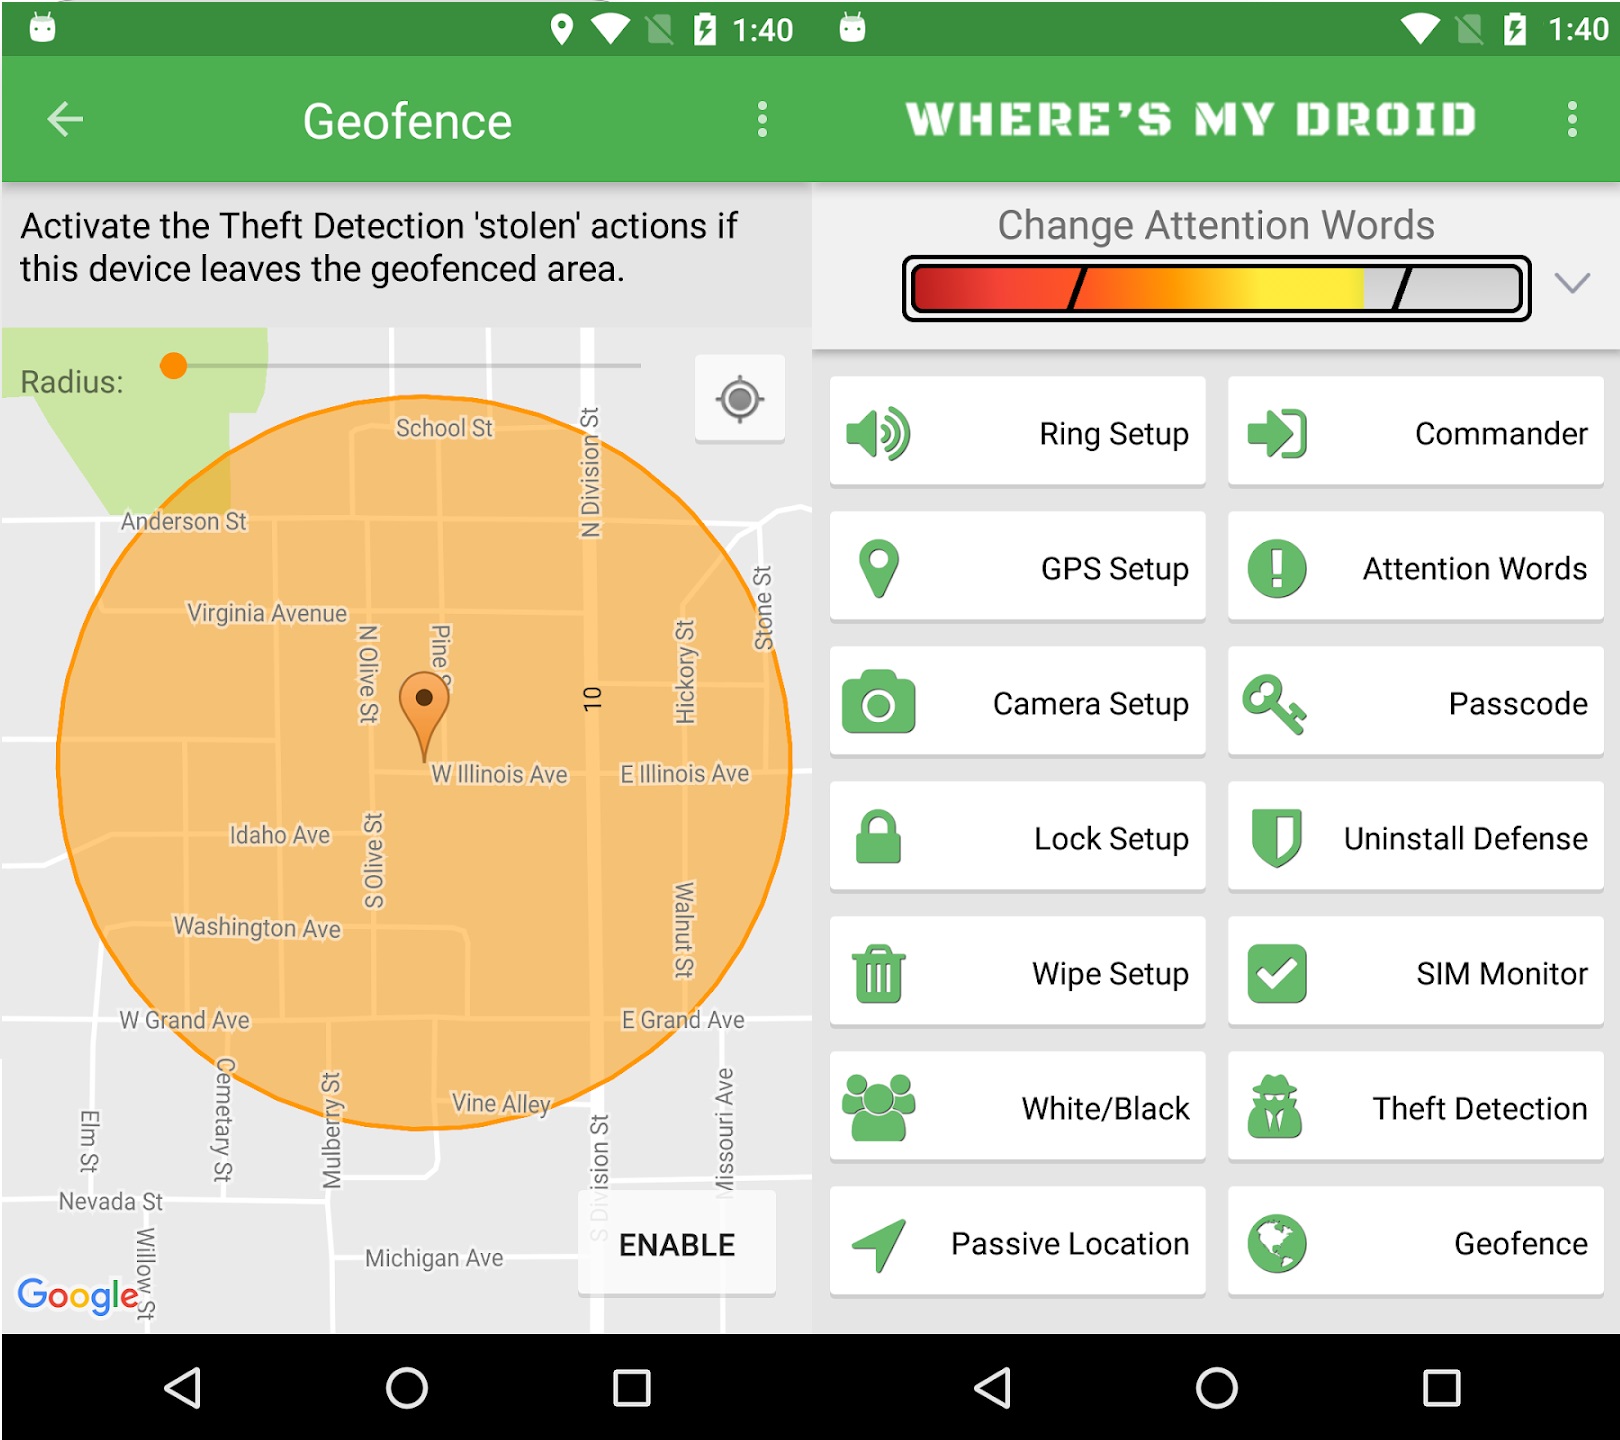 Where's My Droid app interface, emphasizing the location tracking feature and the remote ringing option, a free phone tracker